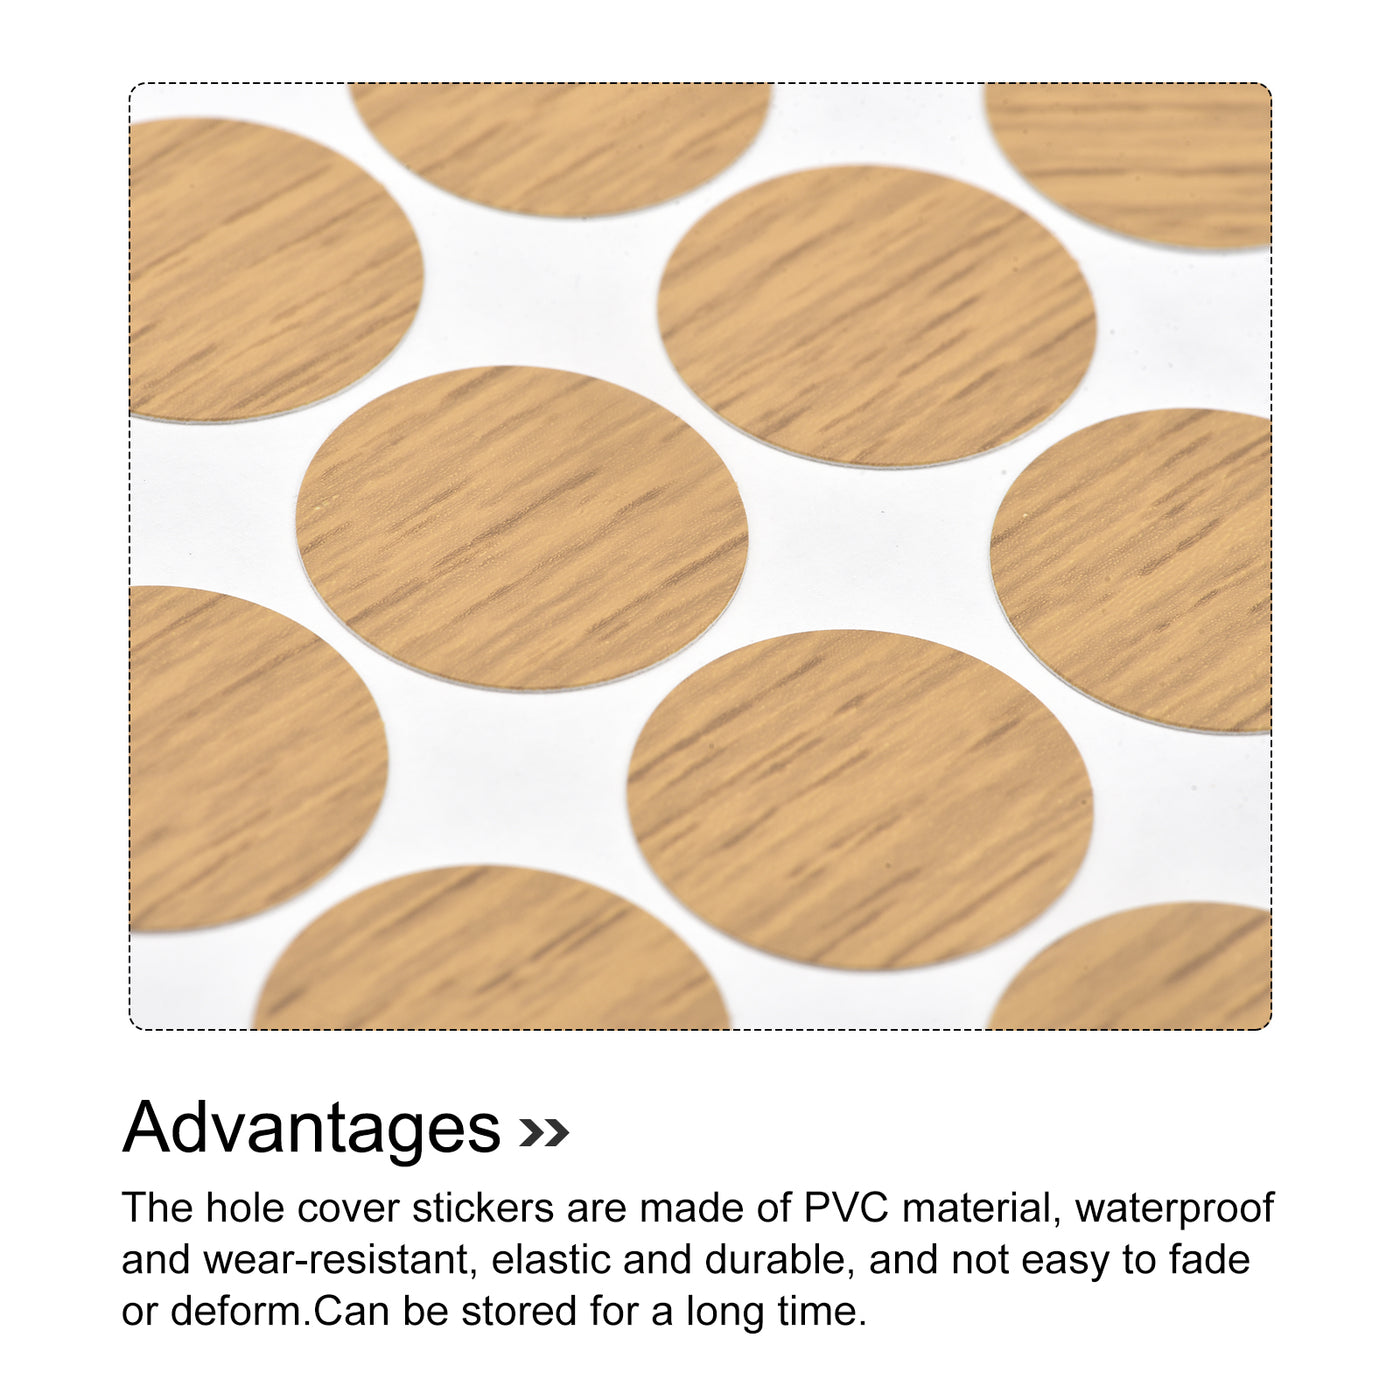 uxcell Uxcell Screw Hole Cover Stickers, 21mm Dia PVC Self Adhesive Covers Caps for Wood Furniture Cabinet Shelf Wardrobe, Maple 6 Sheet/324pcs